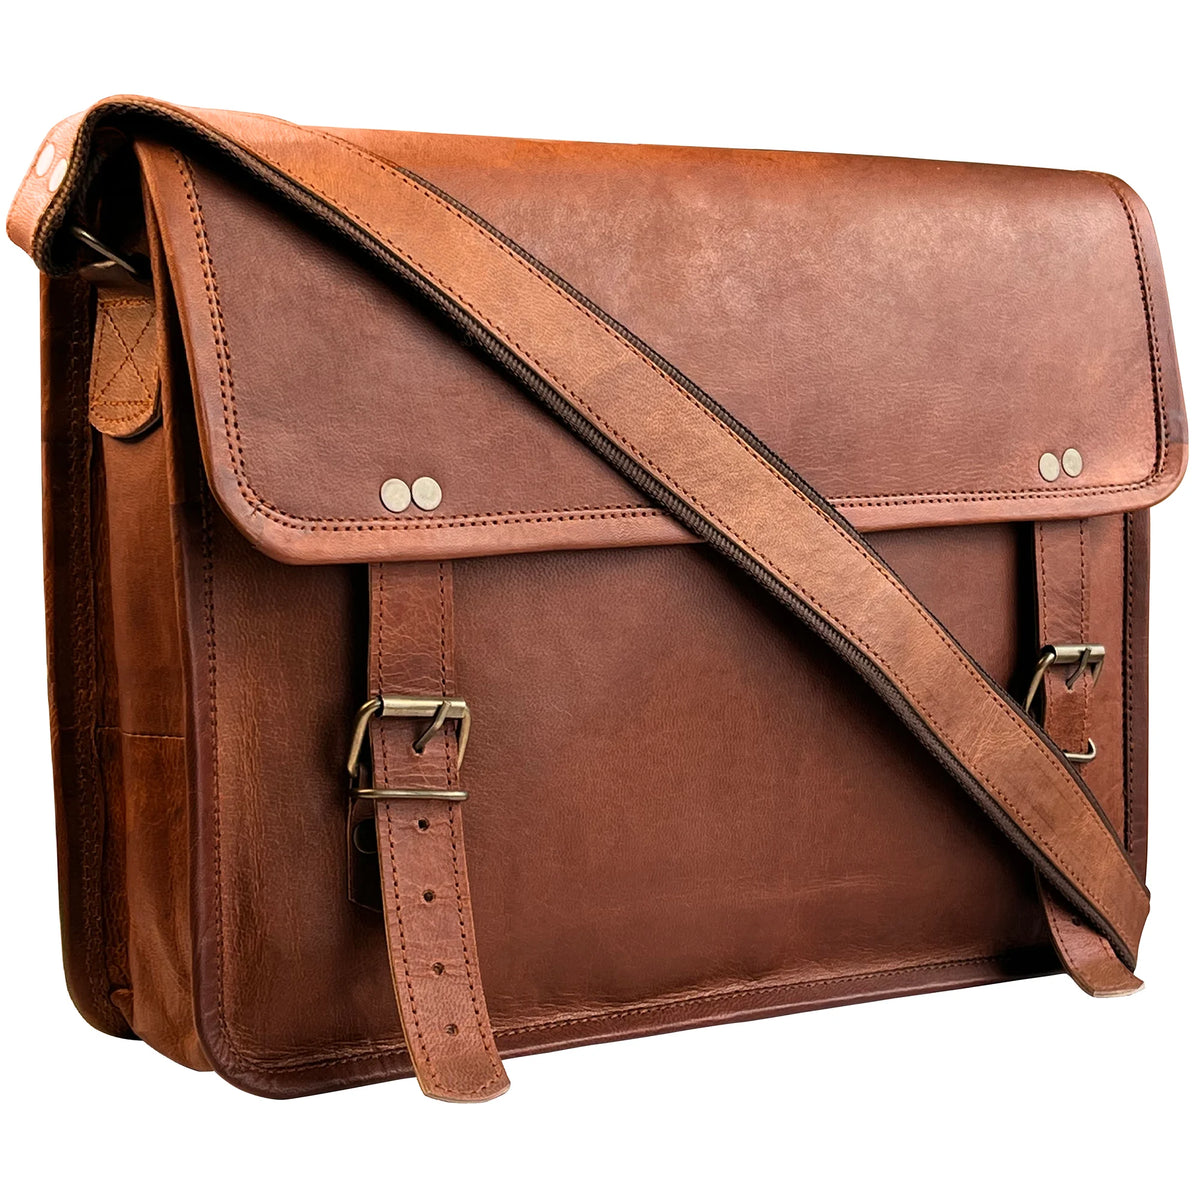 RUSTIC TOWN (LC Dark Brown Leather Computer Bag for Men - 15-inch Laptop  Executive Messenger Bag Briefcase for Office Shoulder Bag iPad Carry for